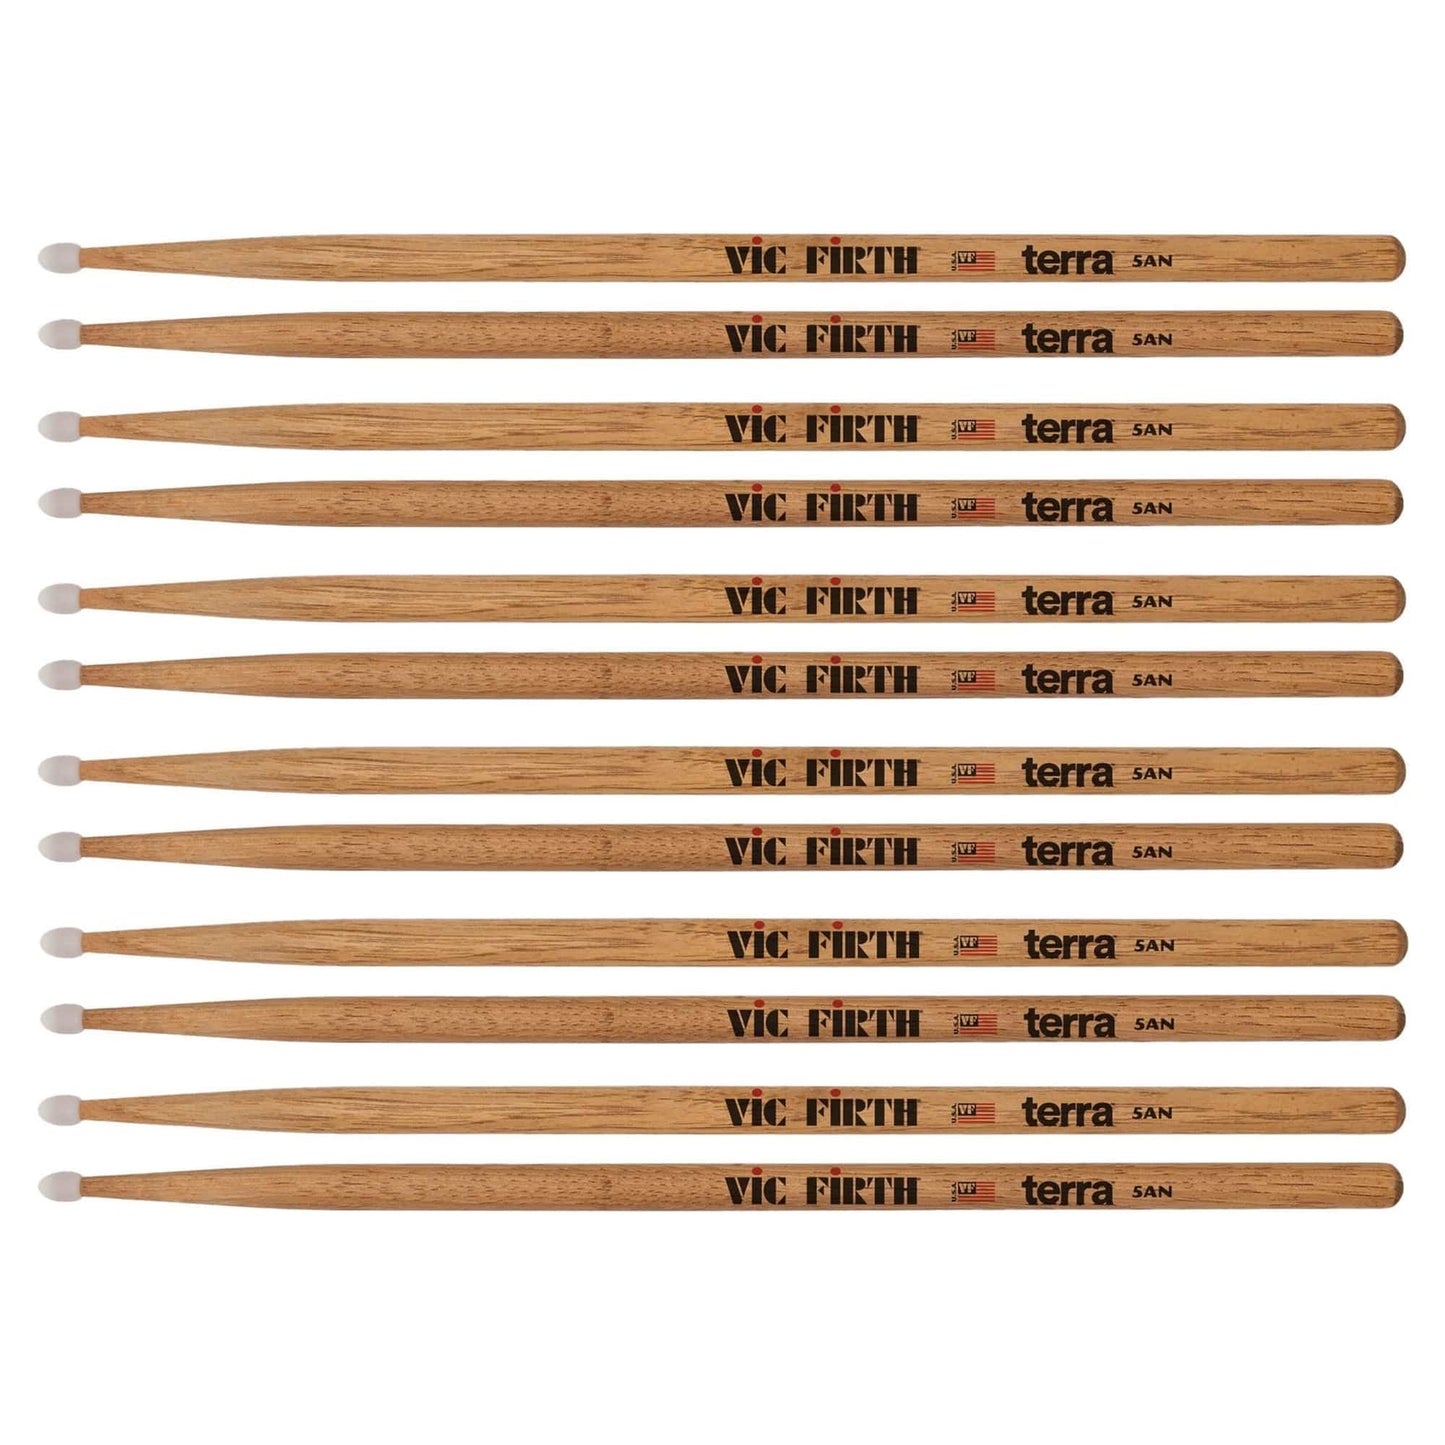 Vic Firth American Classic 5ATN Terra Nylon Tip Drum Sticks 6-Pack Bundle Drums and Percussion / Parts and Accessories / Drum Sticks and Mallets